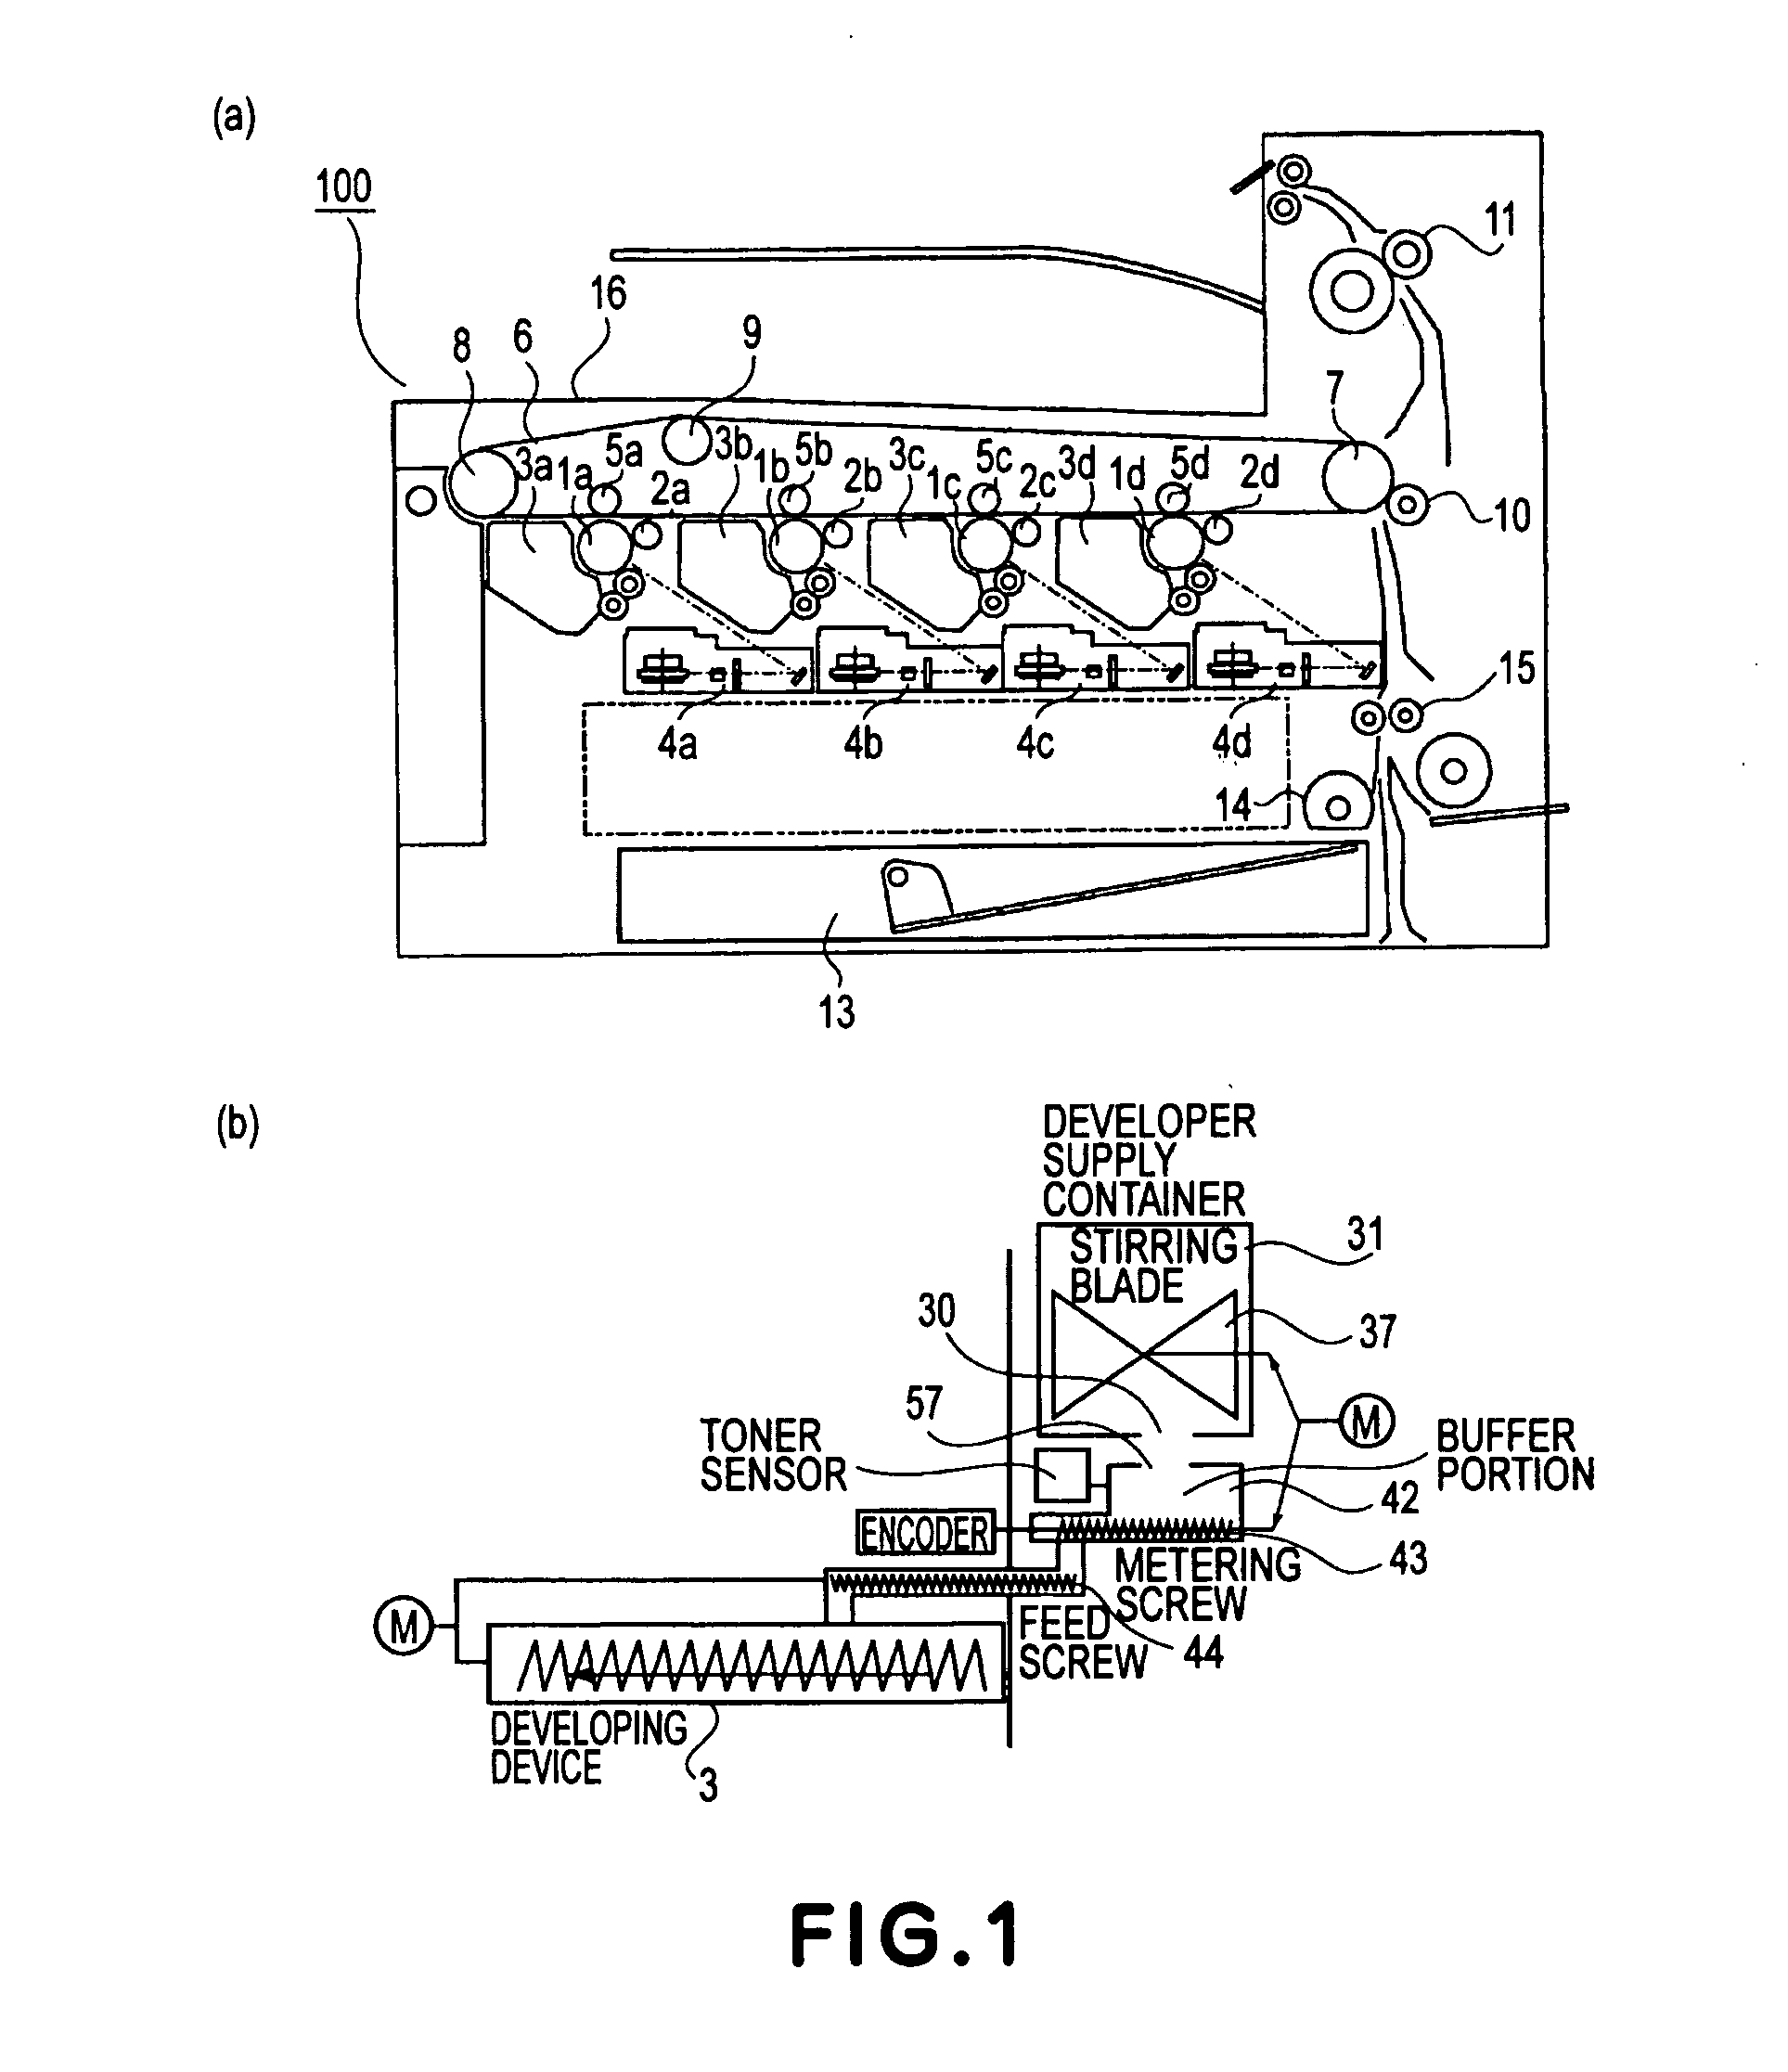 Developer supply container and image forming apparatus